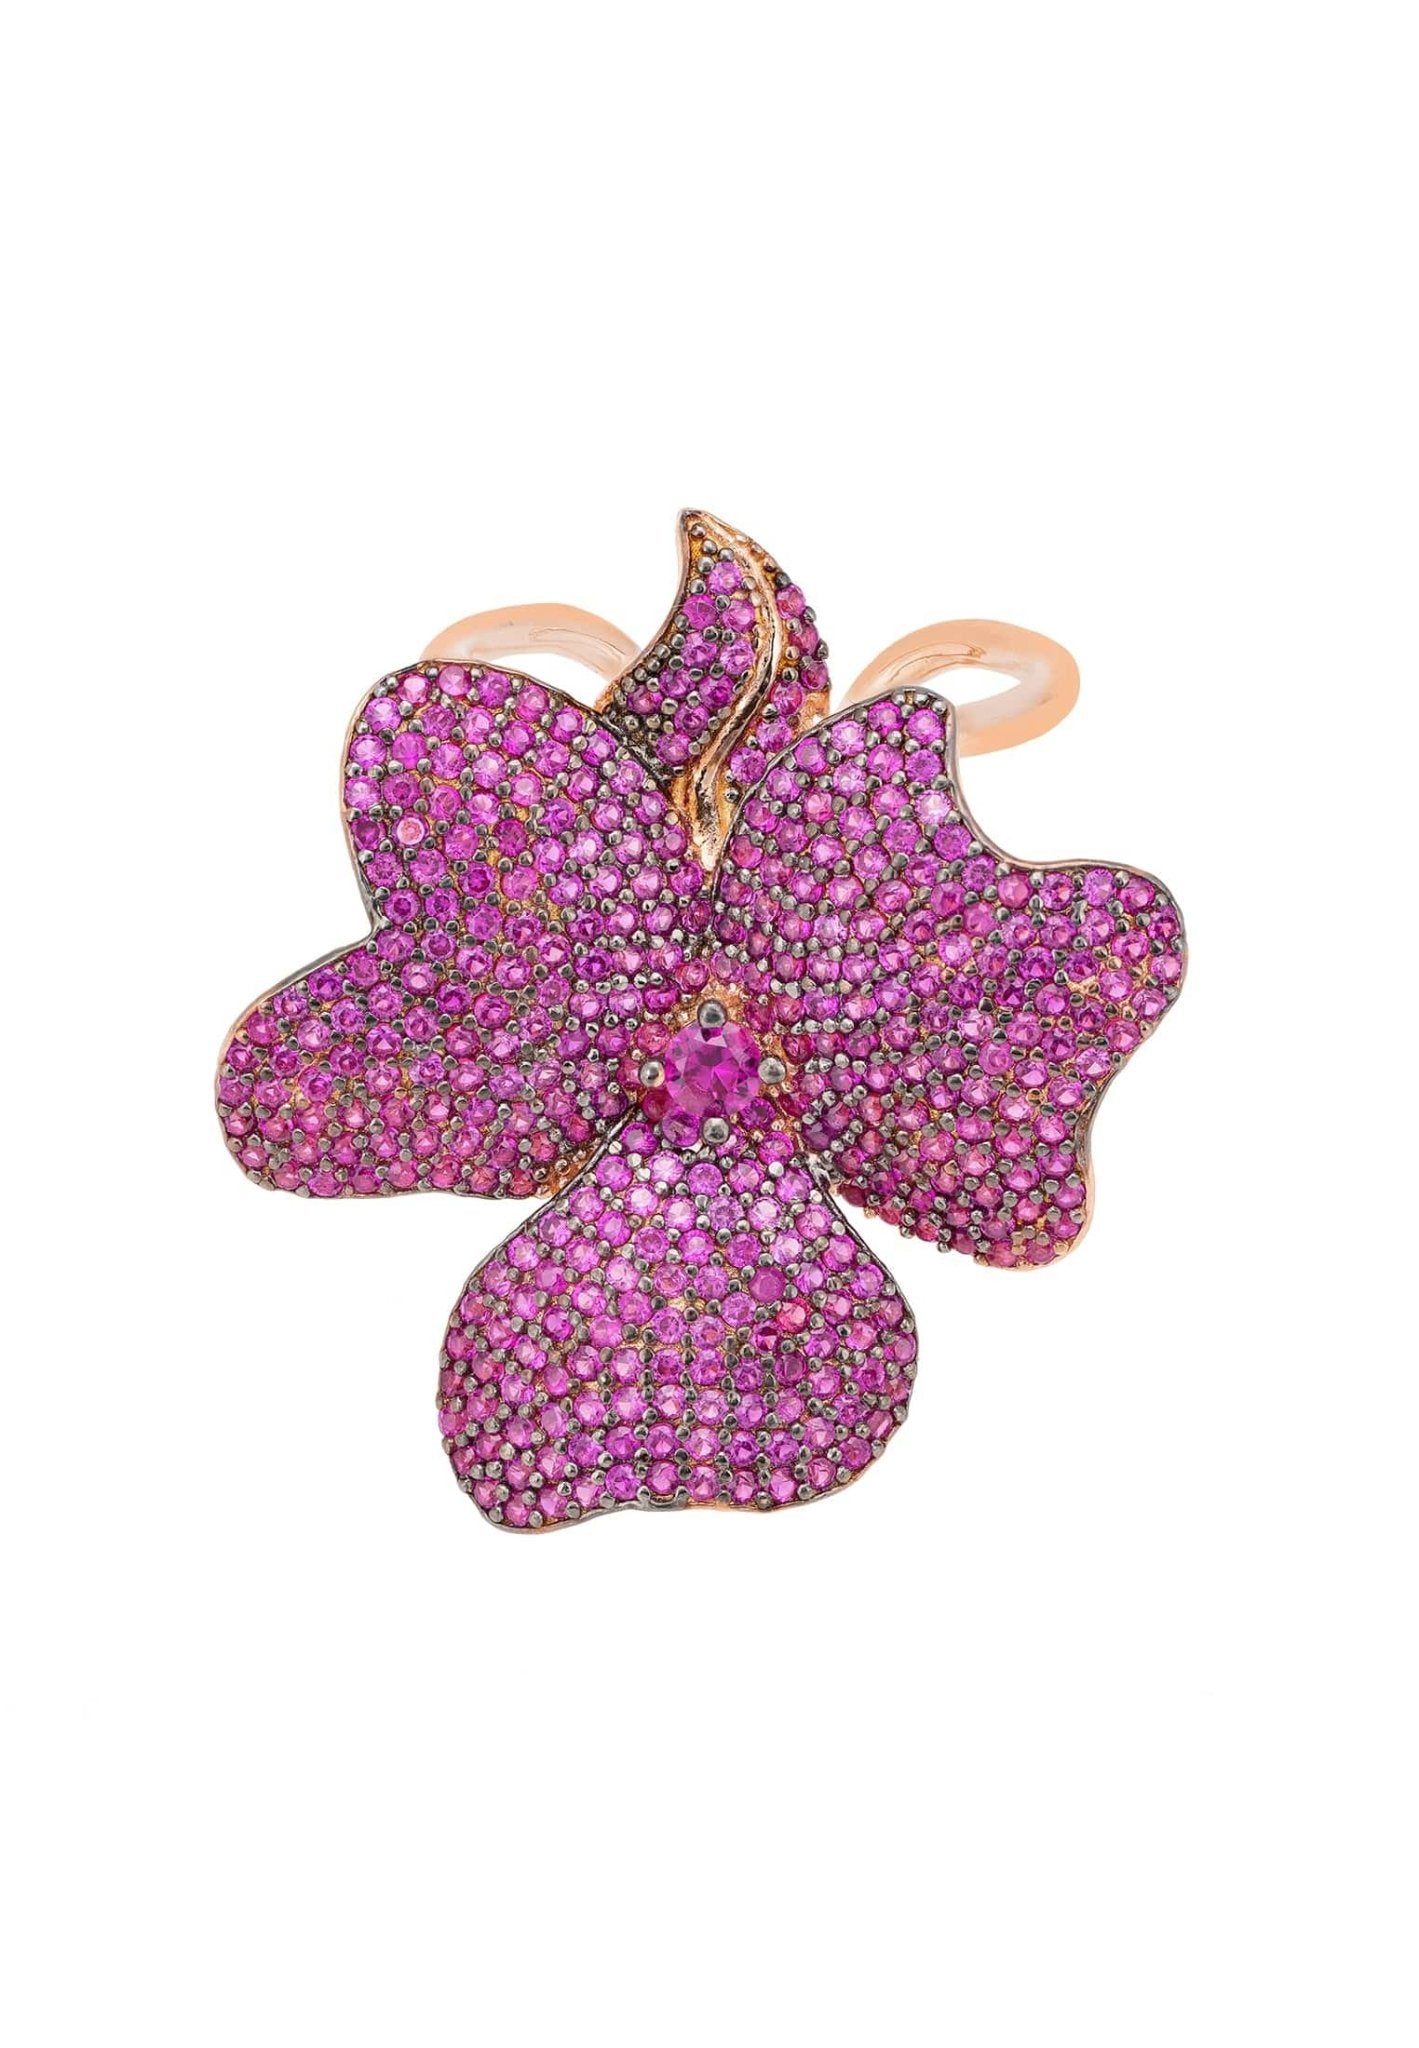 Flower Cocktail Ring Rosegold Ruby - lolaluxeshop